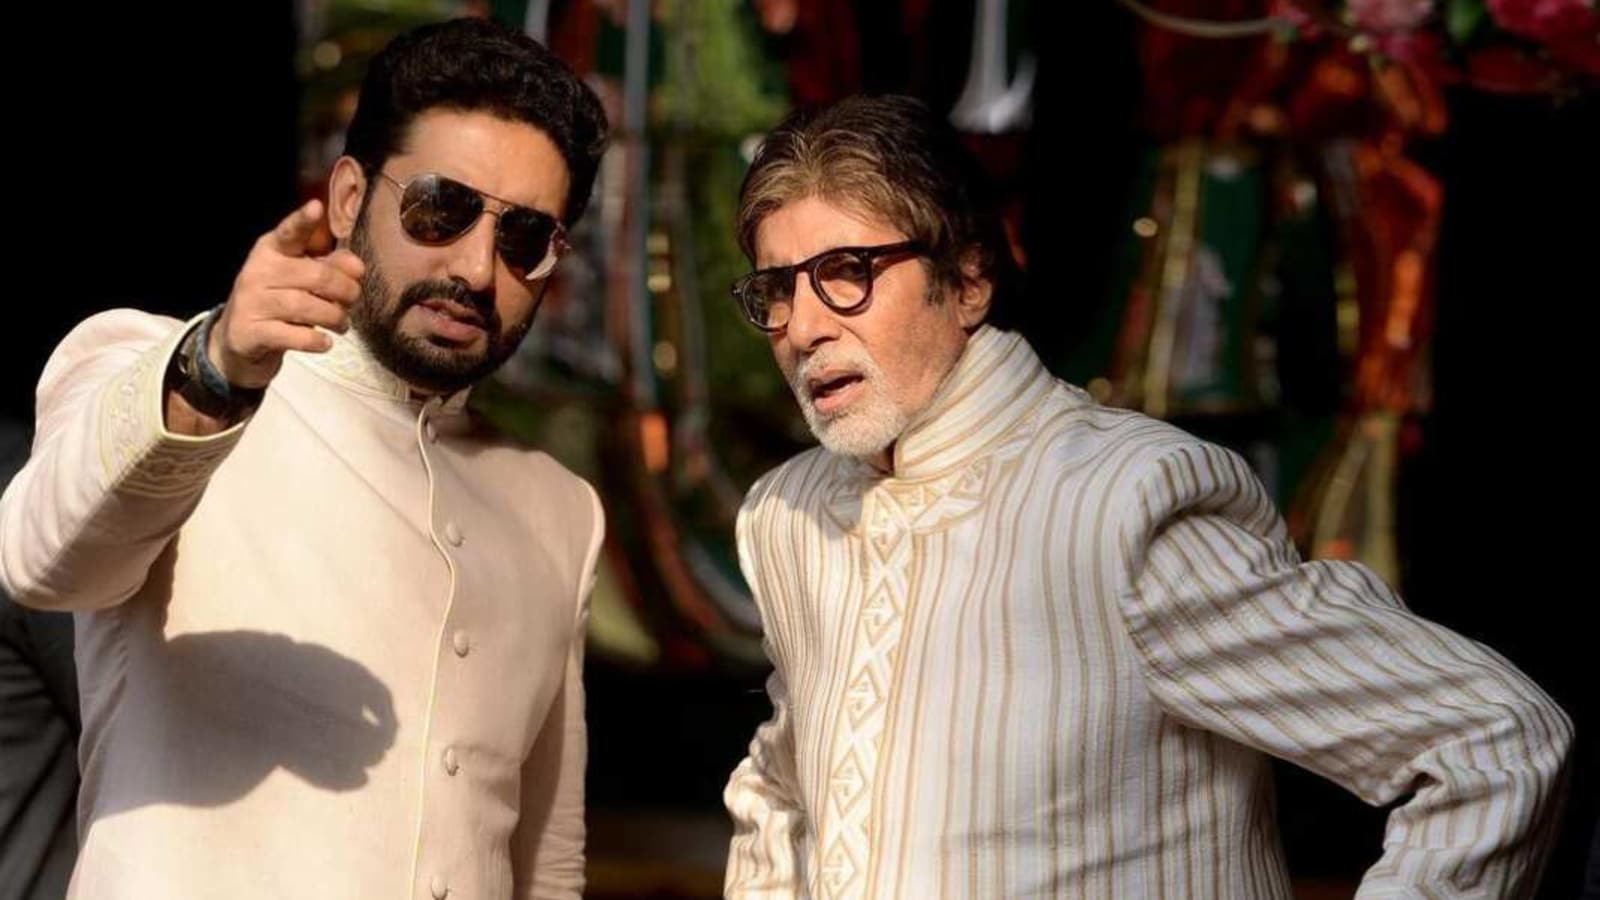 Amitabh Bachchan Shares Pic With Son Abhishek, Talks About How He Has  Become His Friend • News Rush